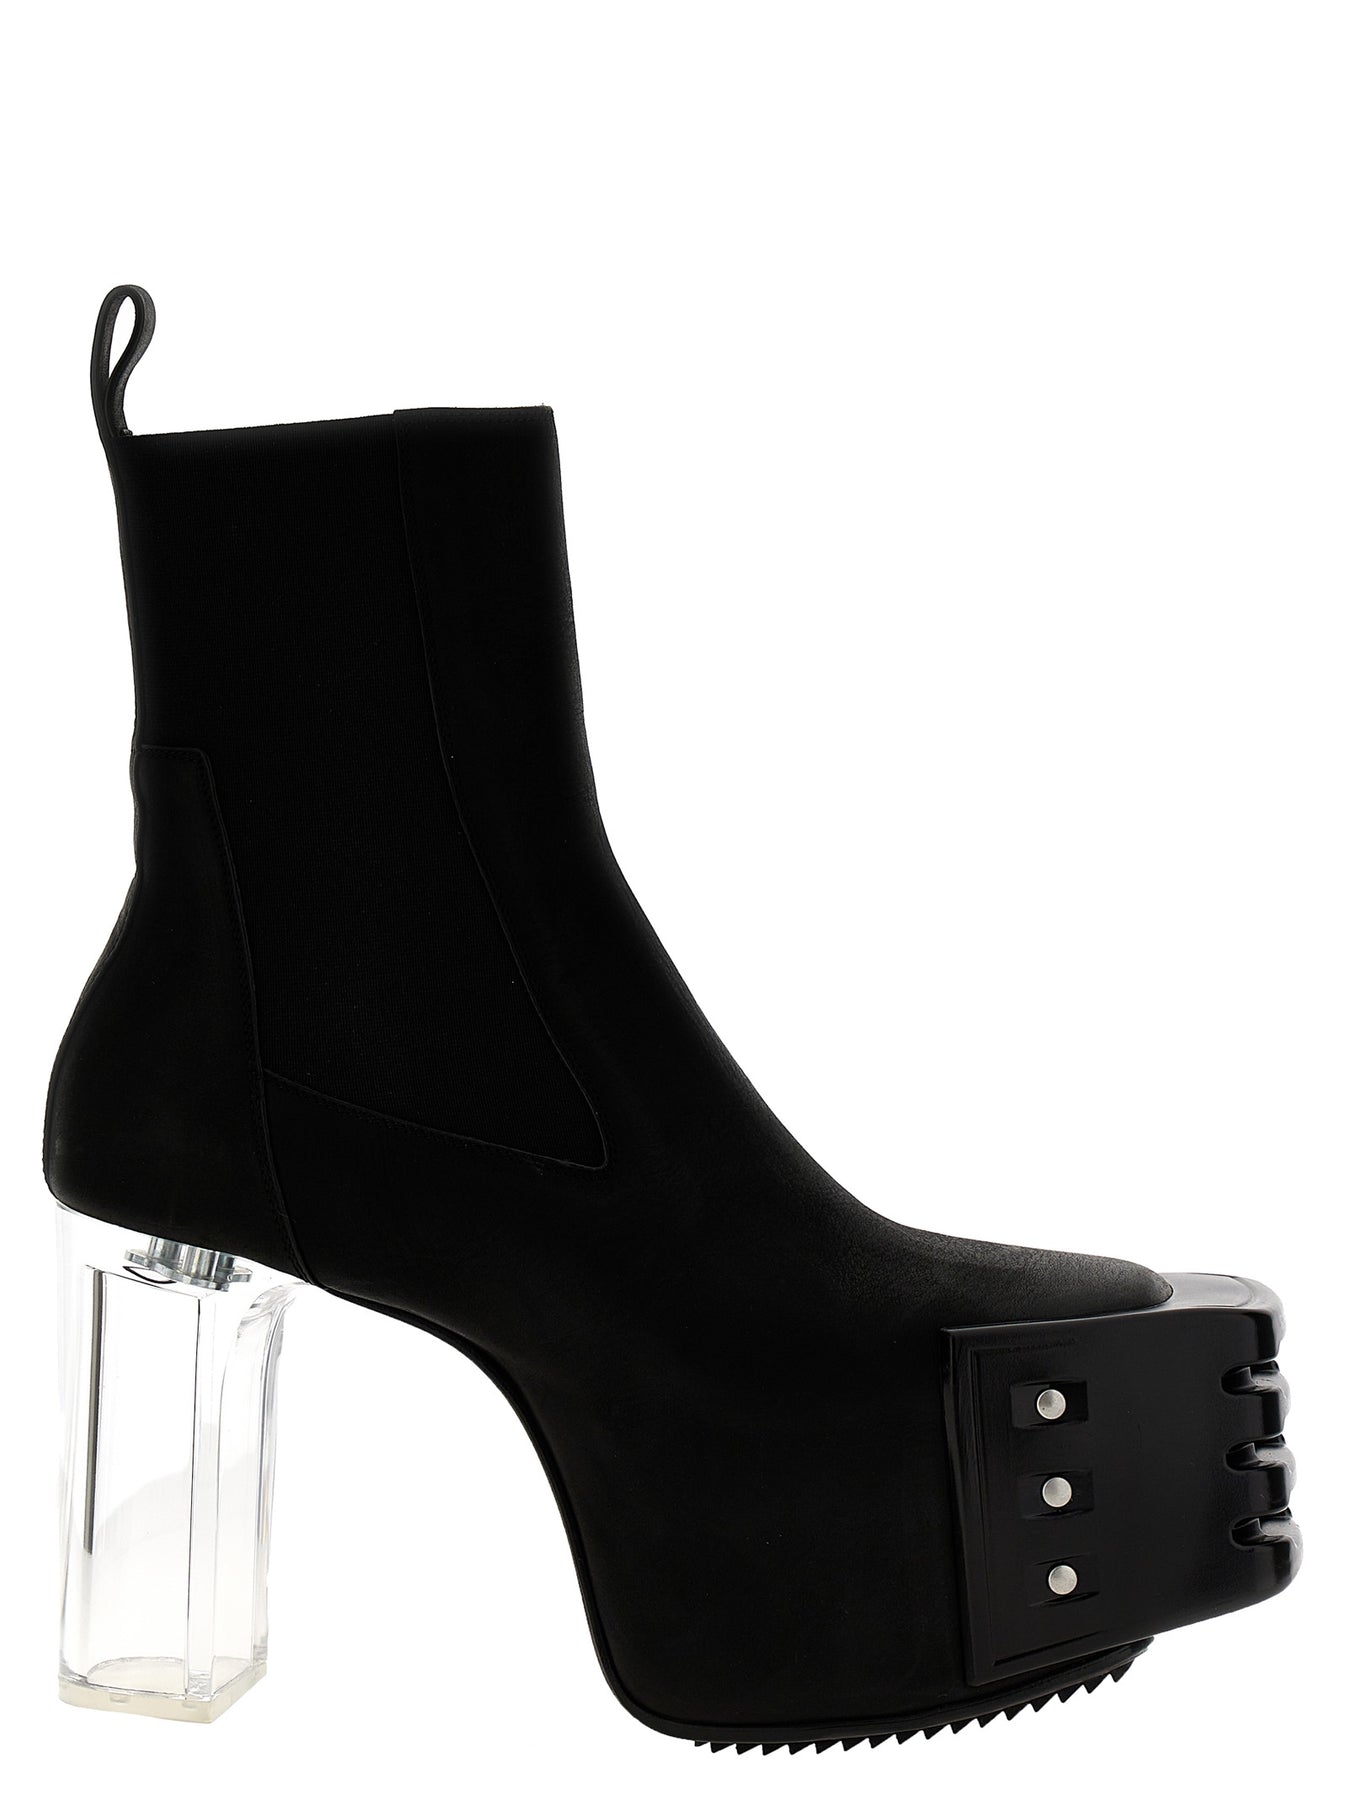 RICK OWENS GRILLED PLATFORMS 45 BOOTS, ANKLE BOOTS BLACK